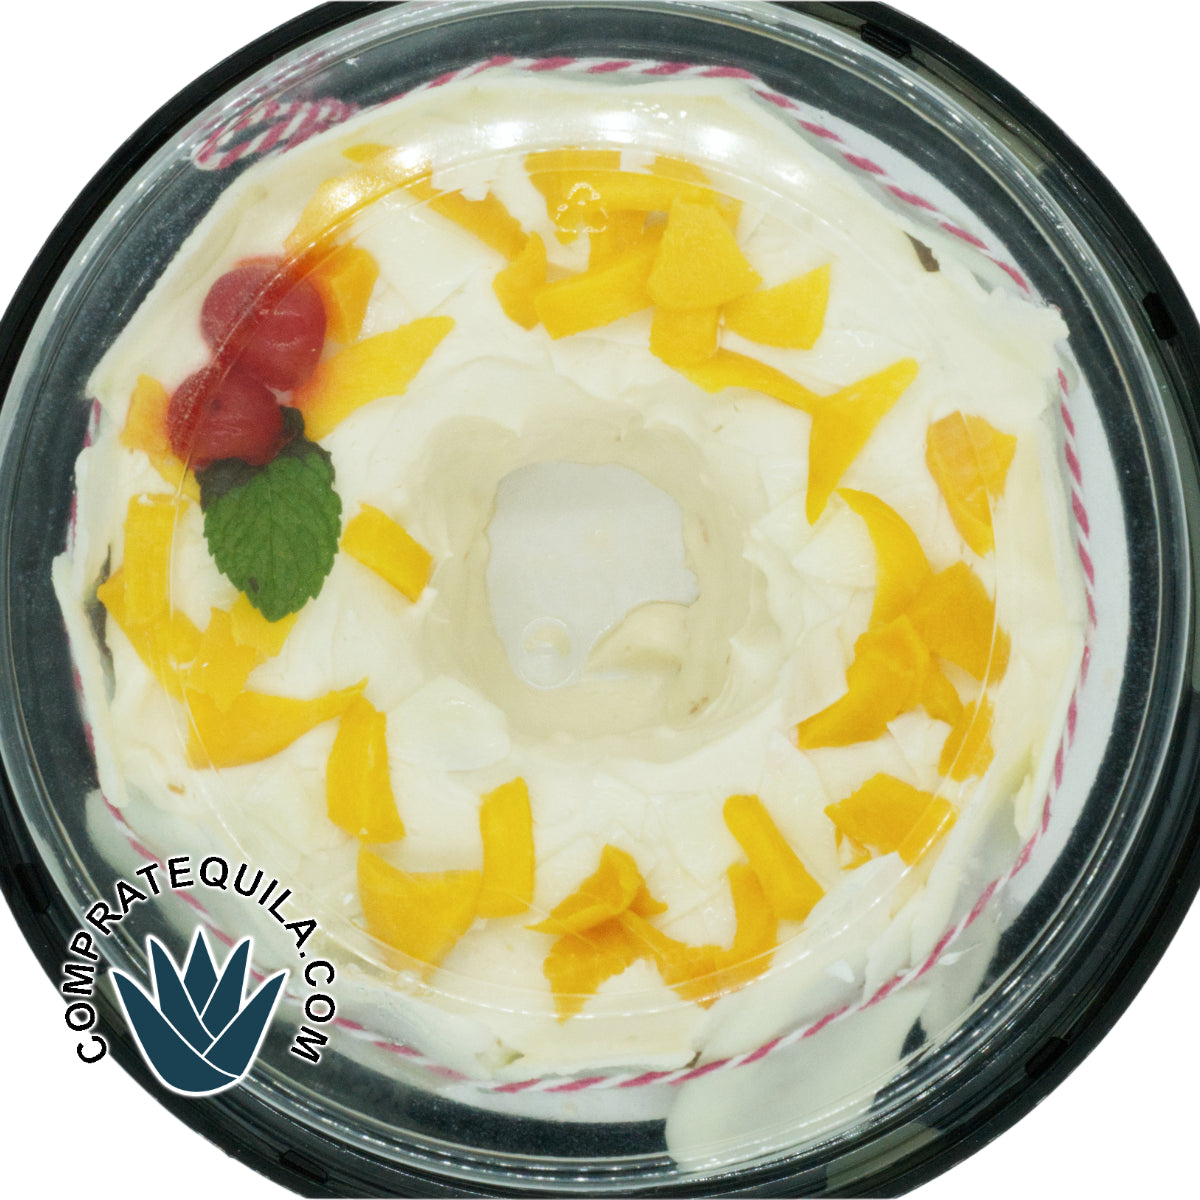 Exclusive Tres Leches Cake with a Touch of Baileys: A Delight to Share at Any Celebration